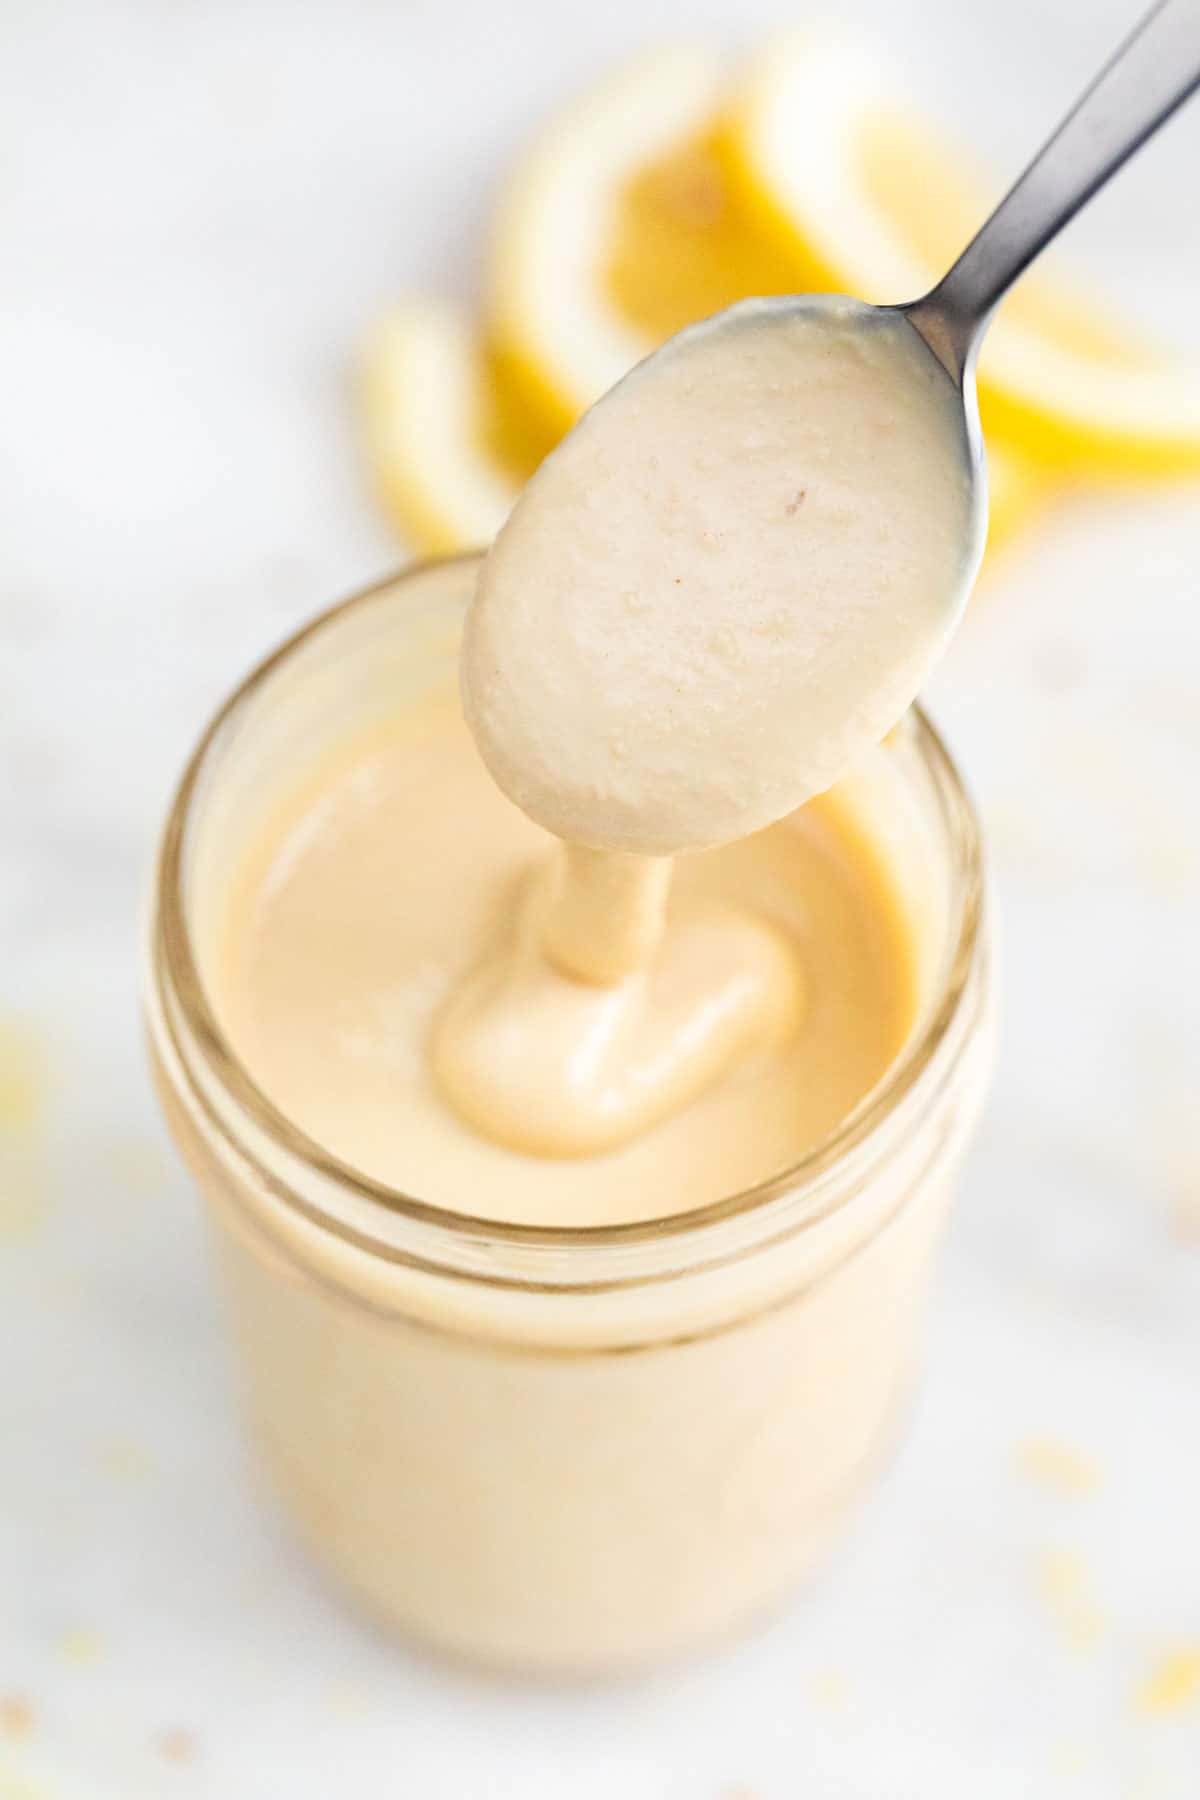 Jar of lemon tahini dressing, with lemon slices at the bottom, being spoon-drizzled.